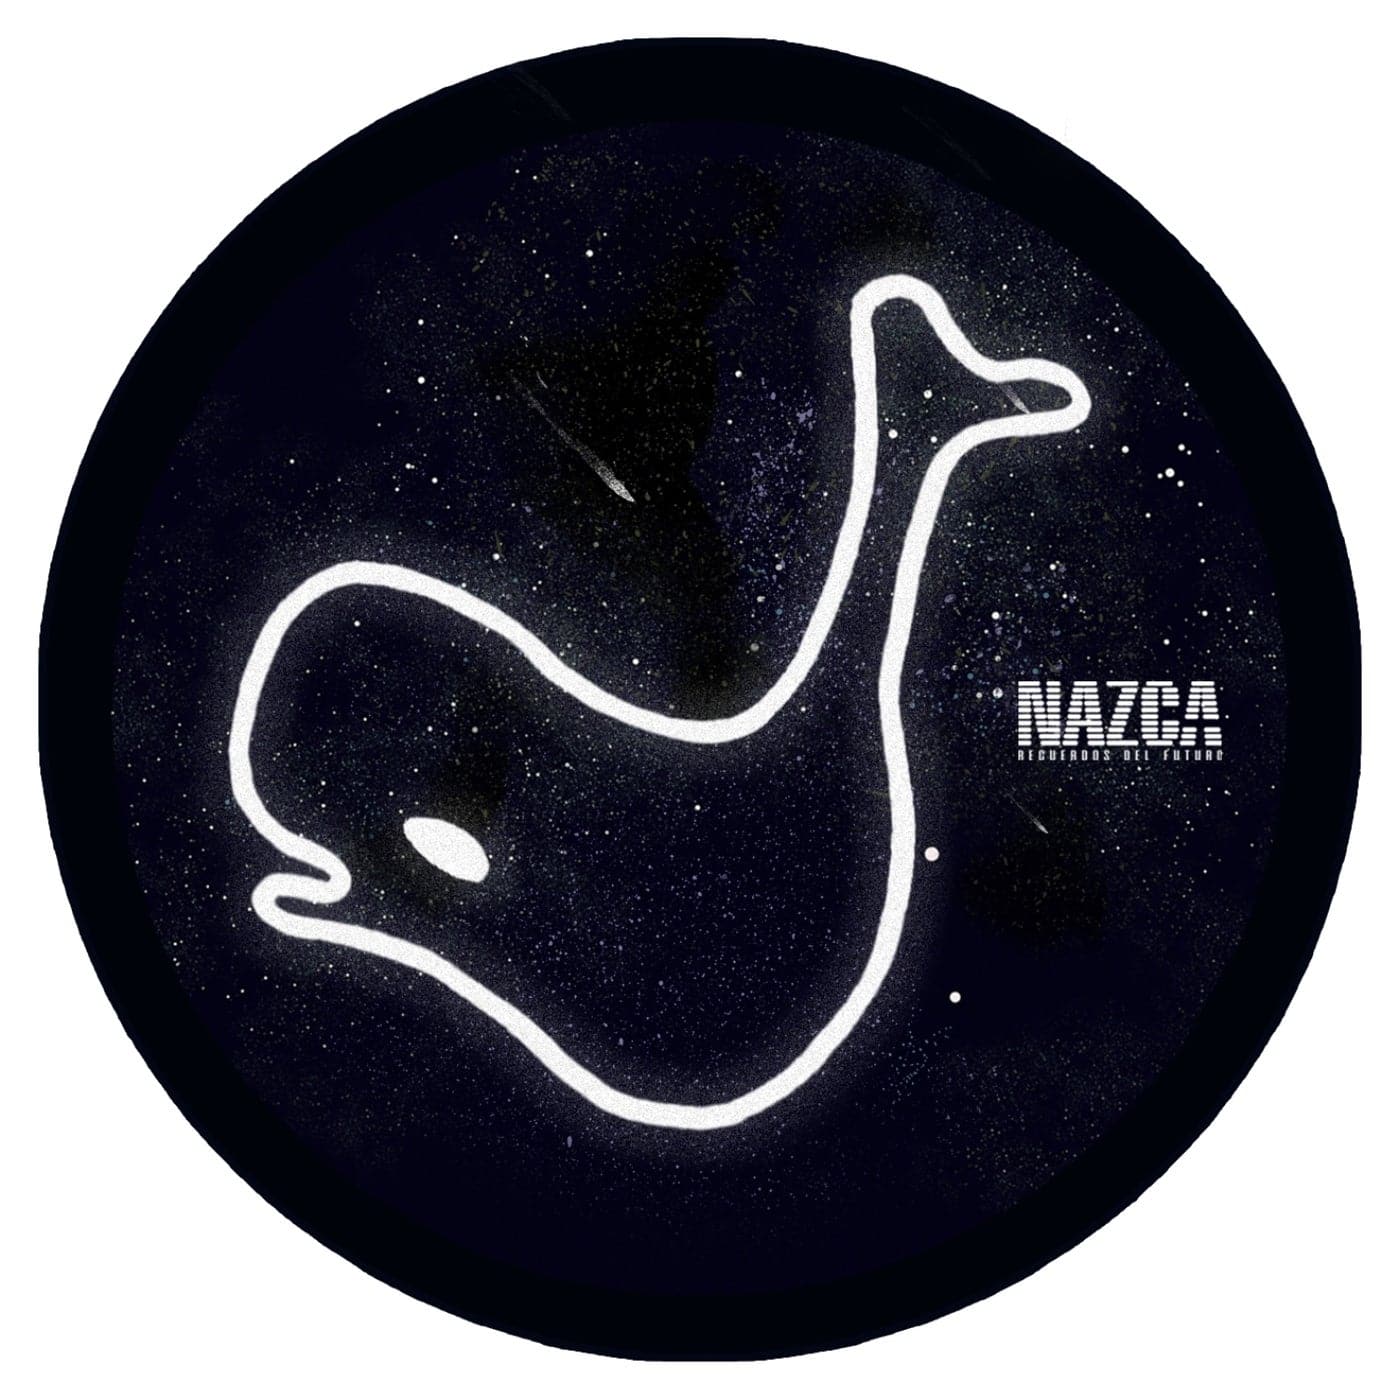 image cover: Octave, Micah Fish - WAVES EP on Nazca